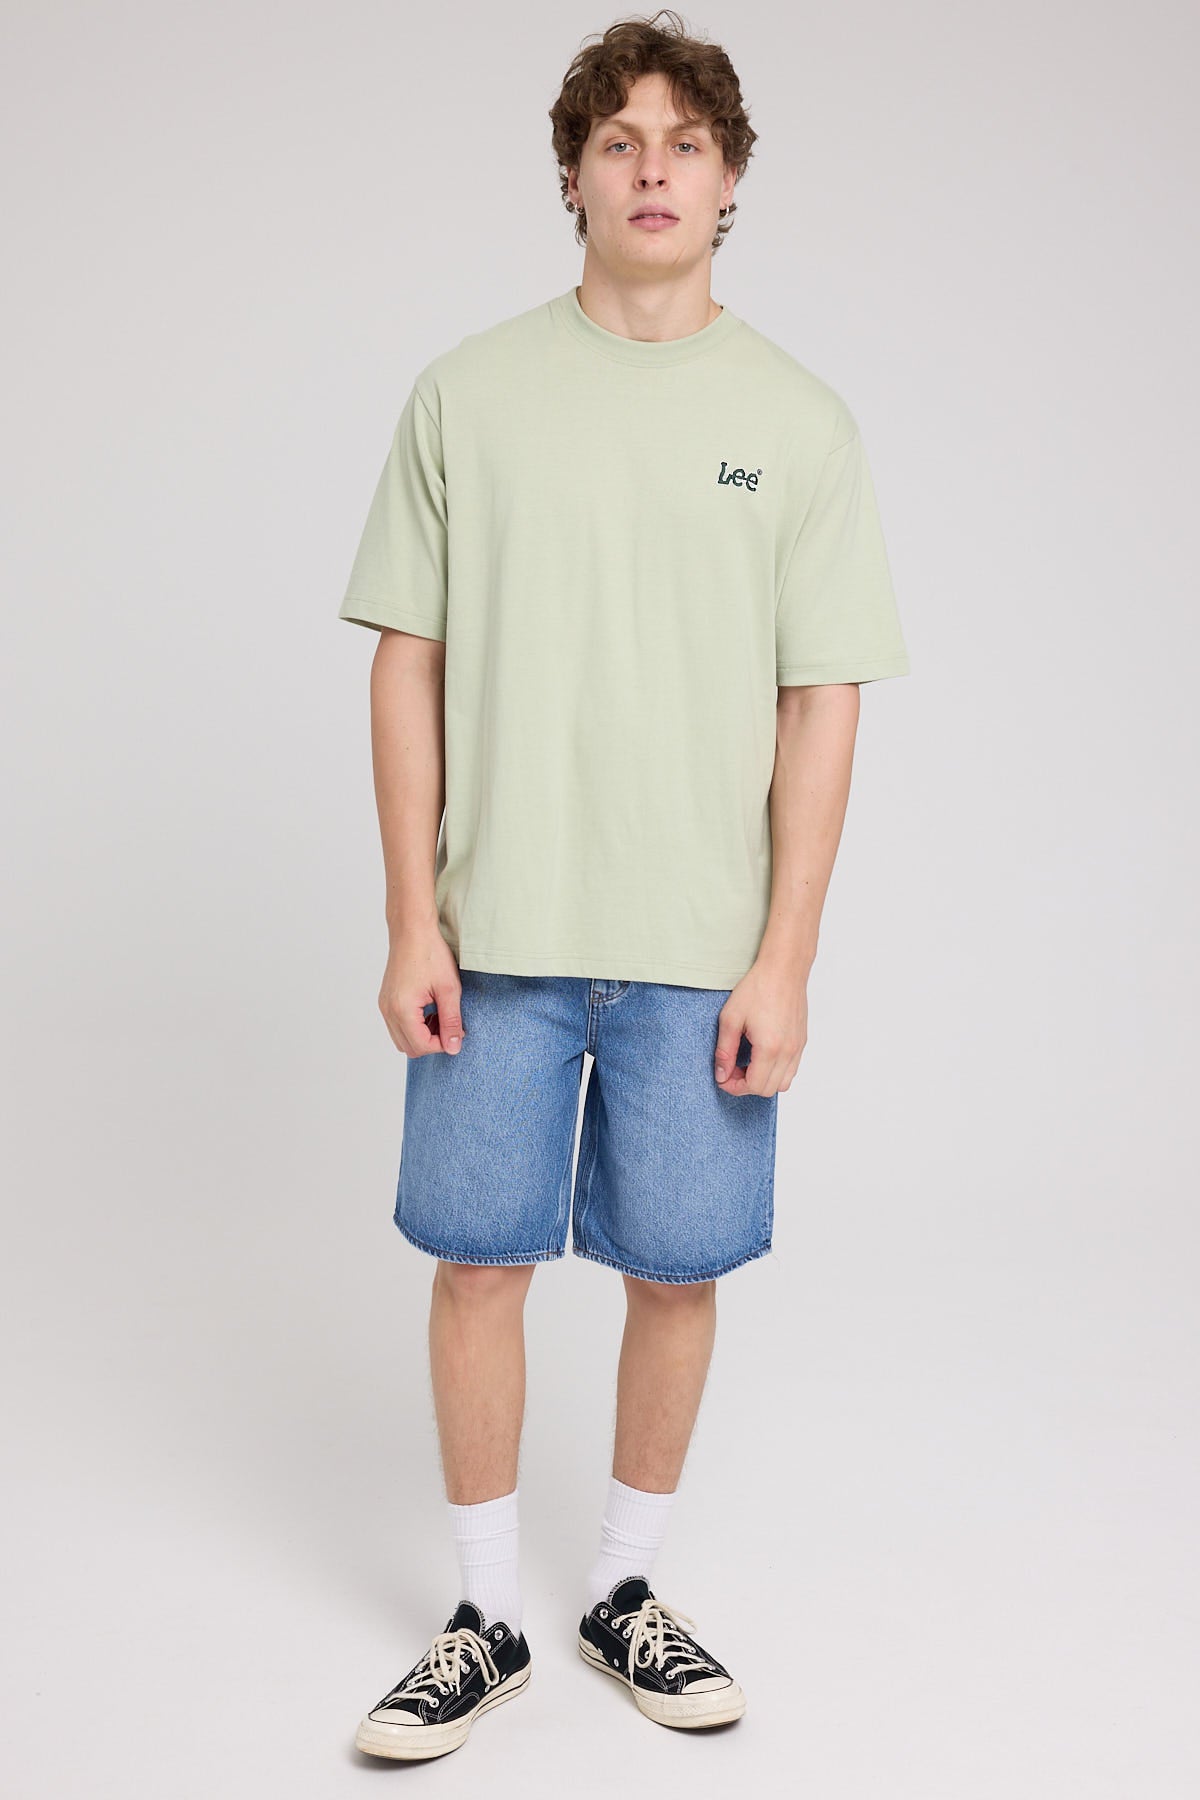 Lee Twitch Baggy Tee Desert Stage – Universal Store